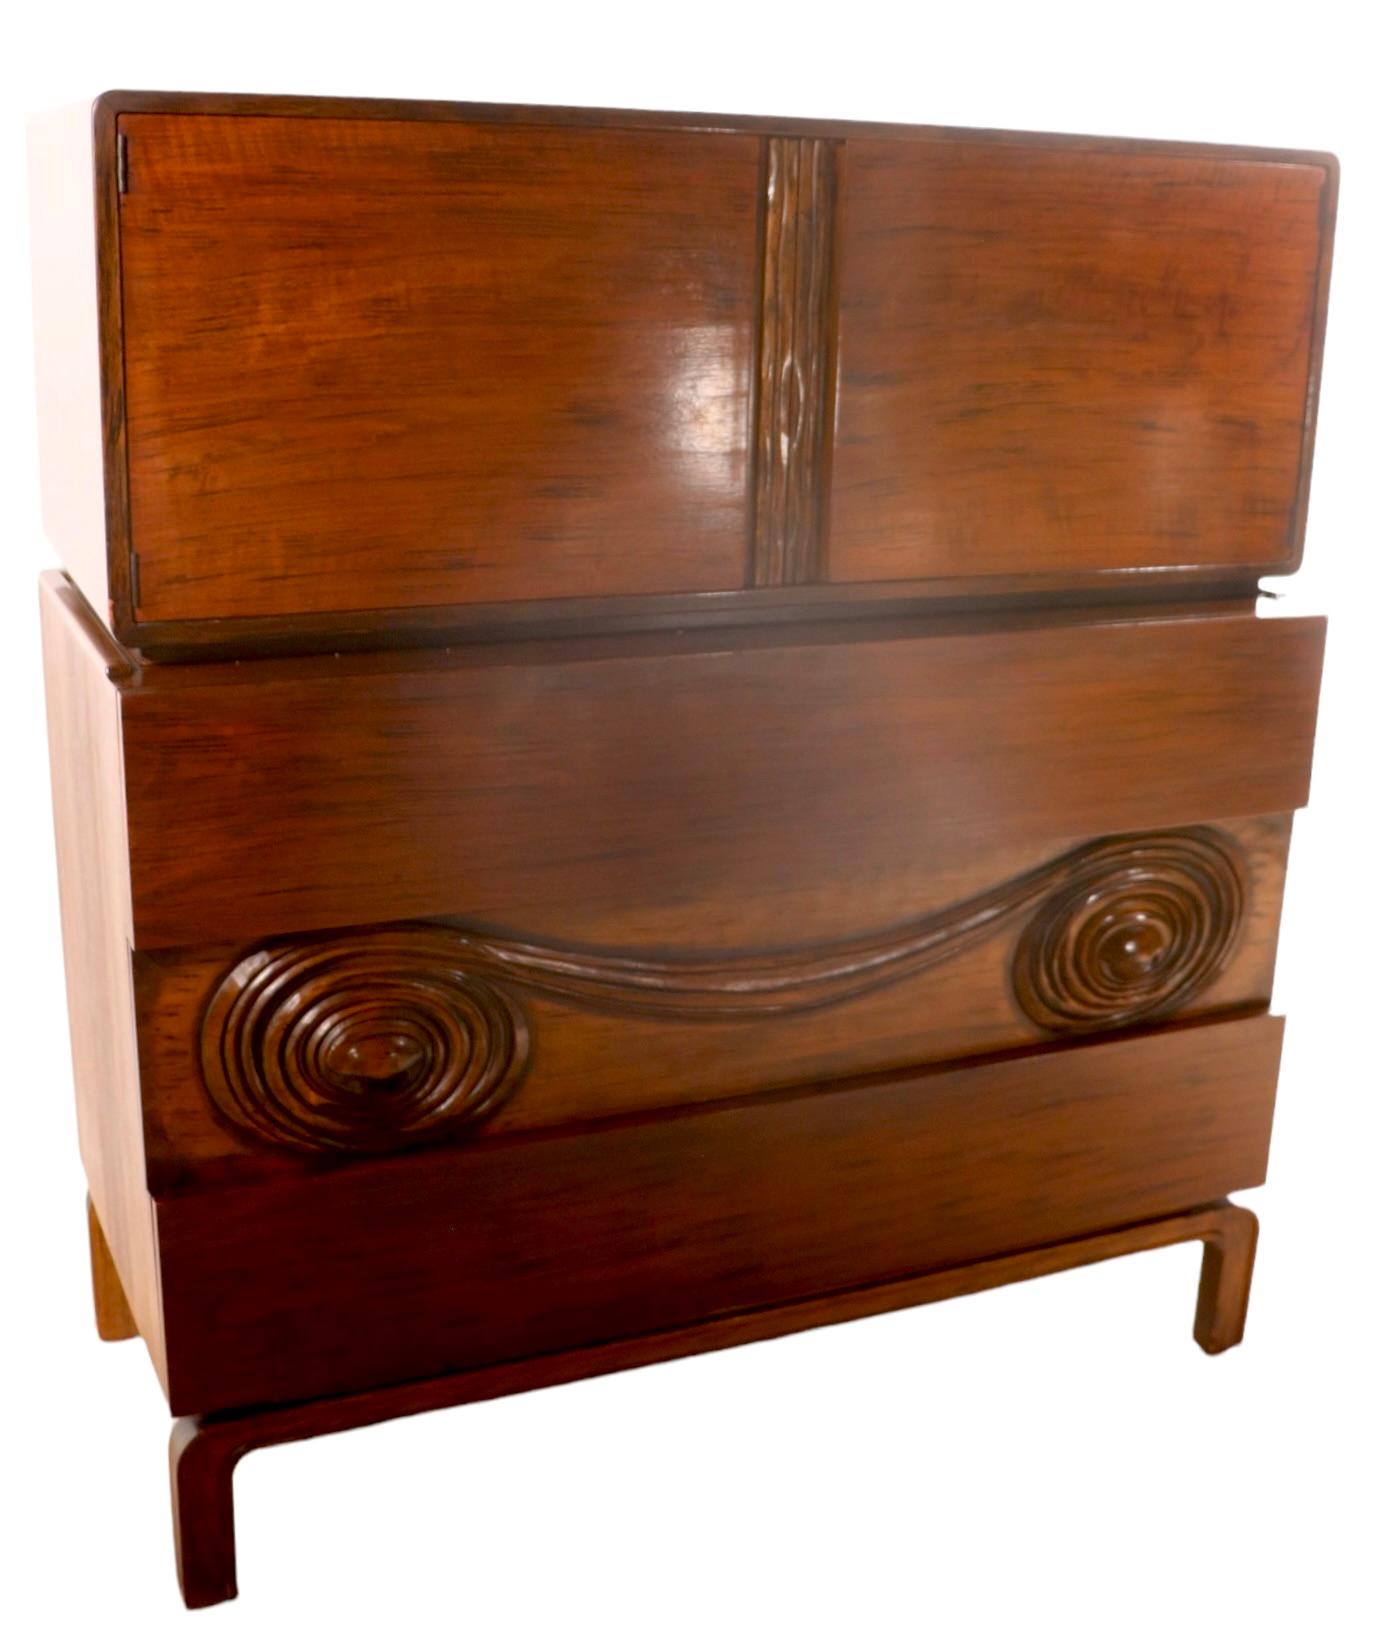 Very unusual and rare two part chest on chest, made in Sweden, c 1950’s, designed by Edmond Spence. Executed in exotic Macassar veneer, with dramatic carved front panel.
         